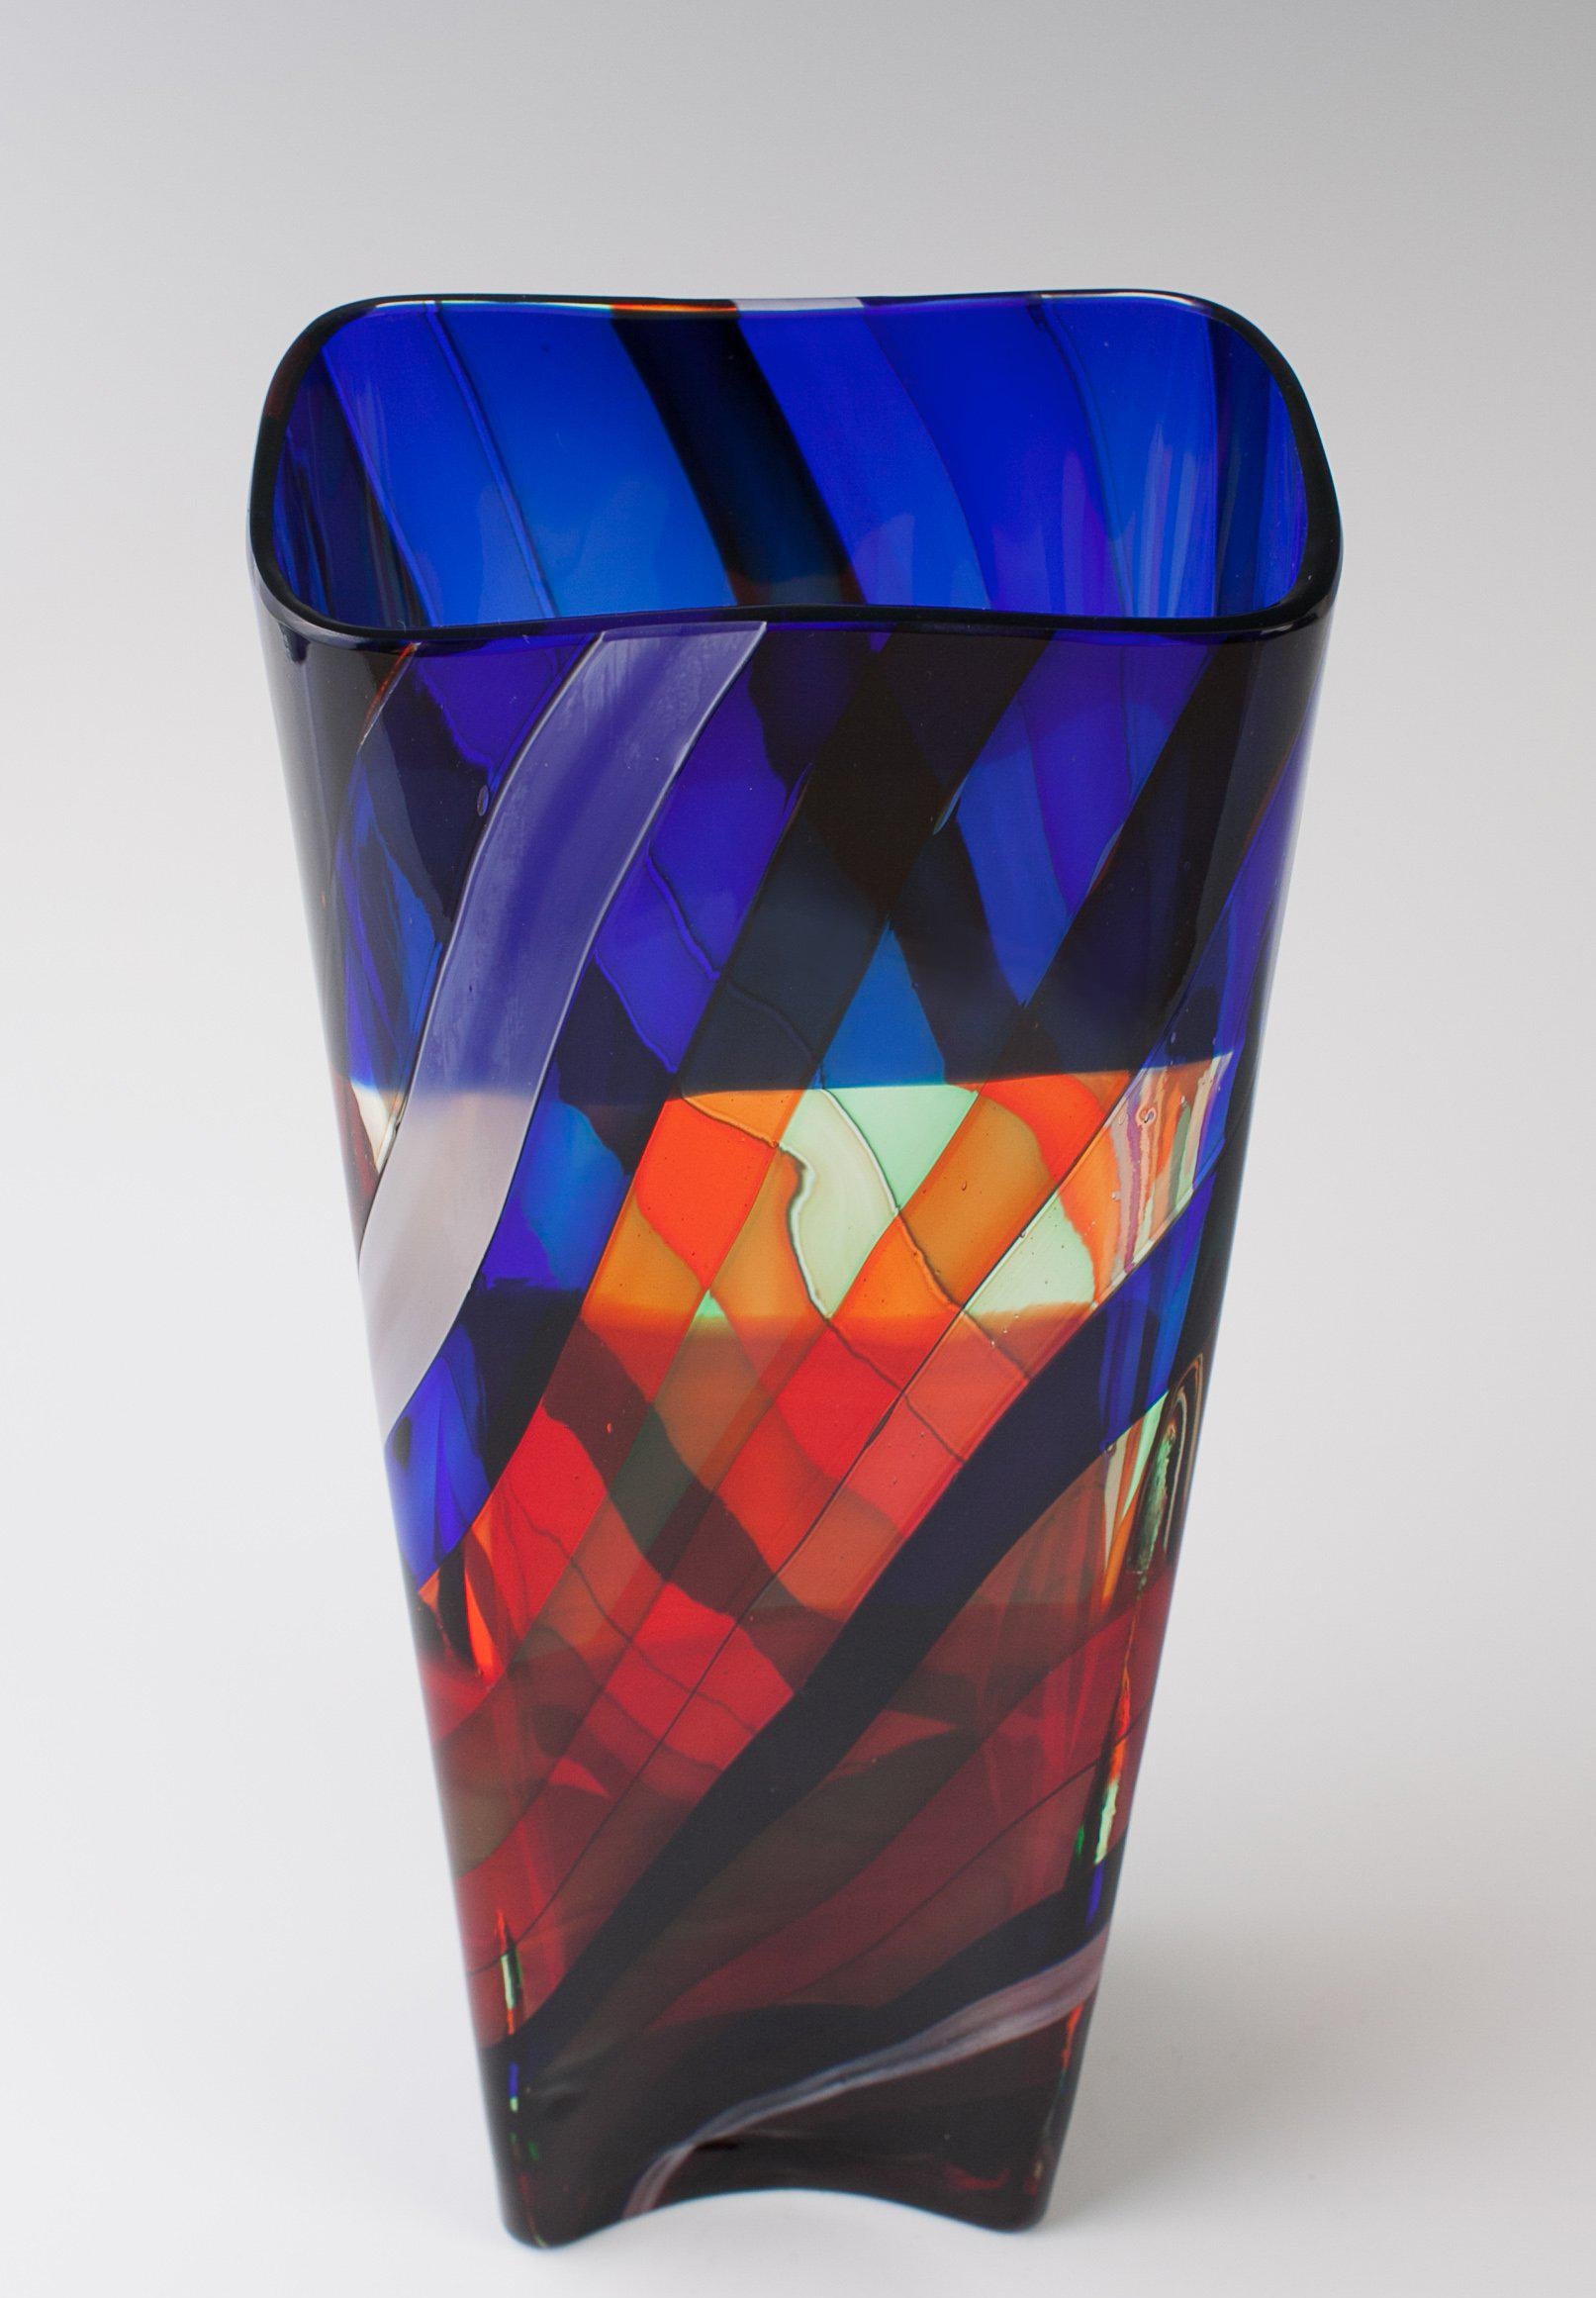 Fulvio Bianconi. 'Scozzese' vase, circa 1954. H. 26.5 cm. Made by Venini & C. clear glass with fused ribbons, green, blue, red and opaque white and red. Marked: venini murano ITALY (round acid stamp).
Acid signed, three-lines 